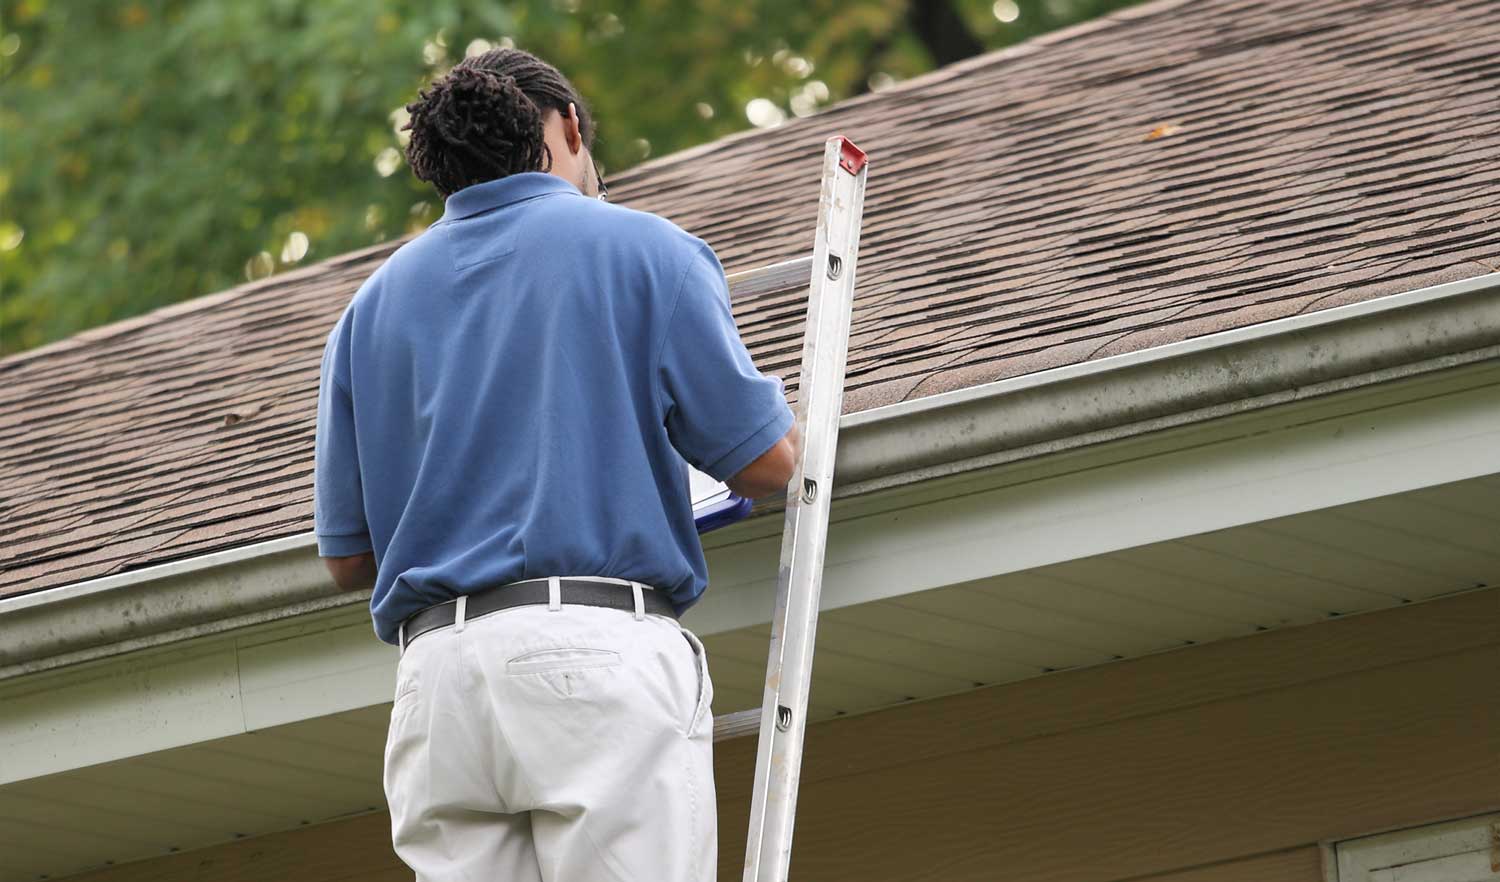 Inspector examining a roof for concerns or needed repairs